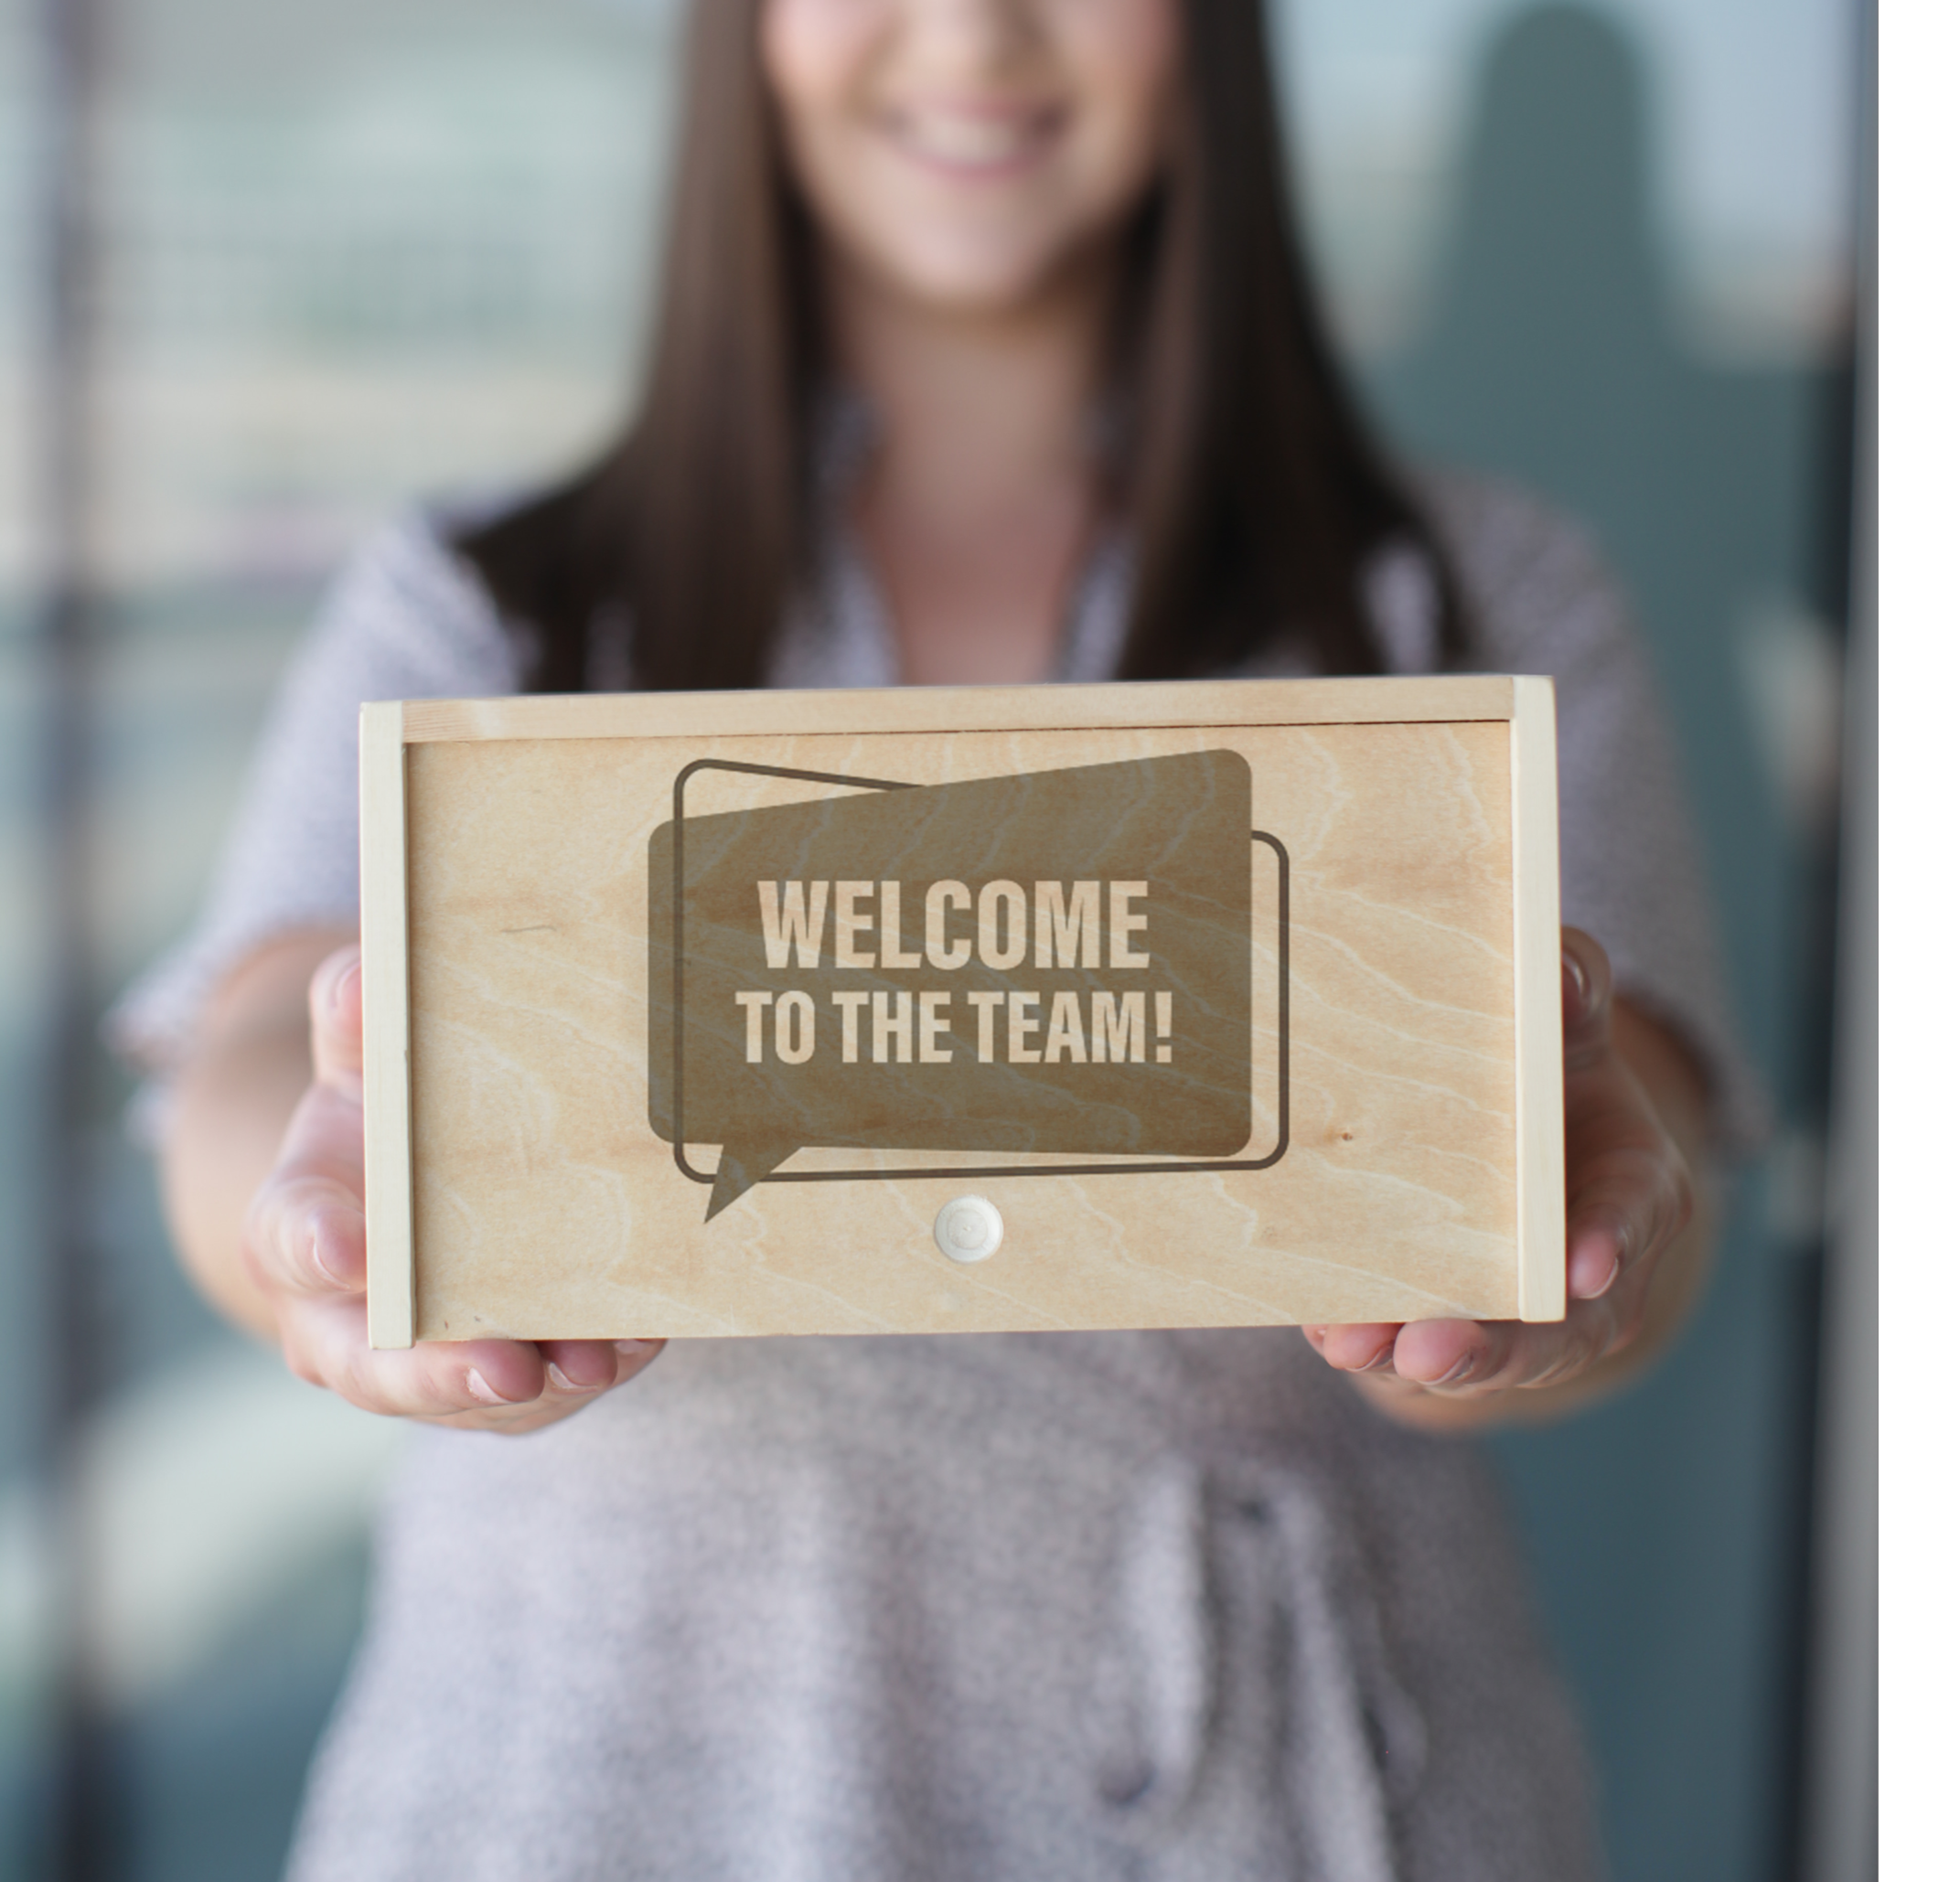 welcome gifts | gifts for new team members | New employee gifts | employee gifts